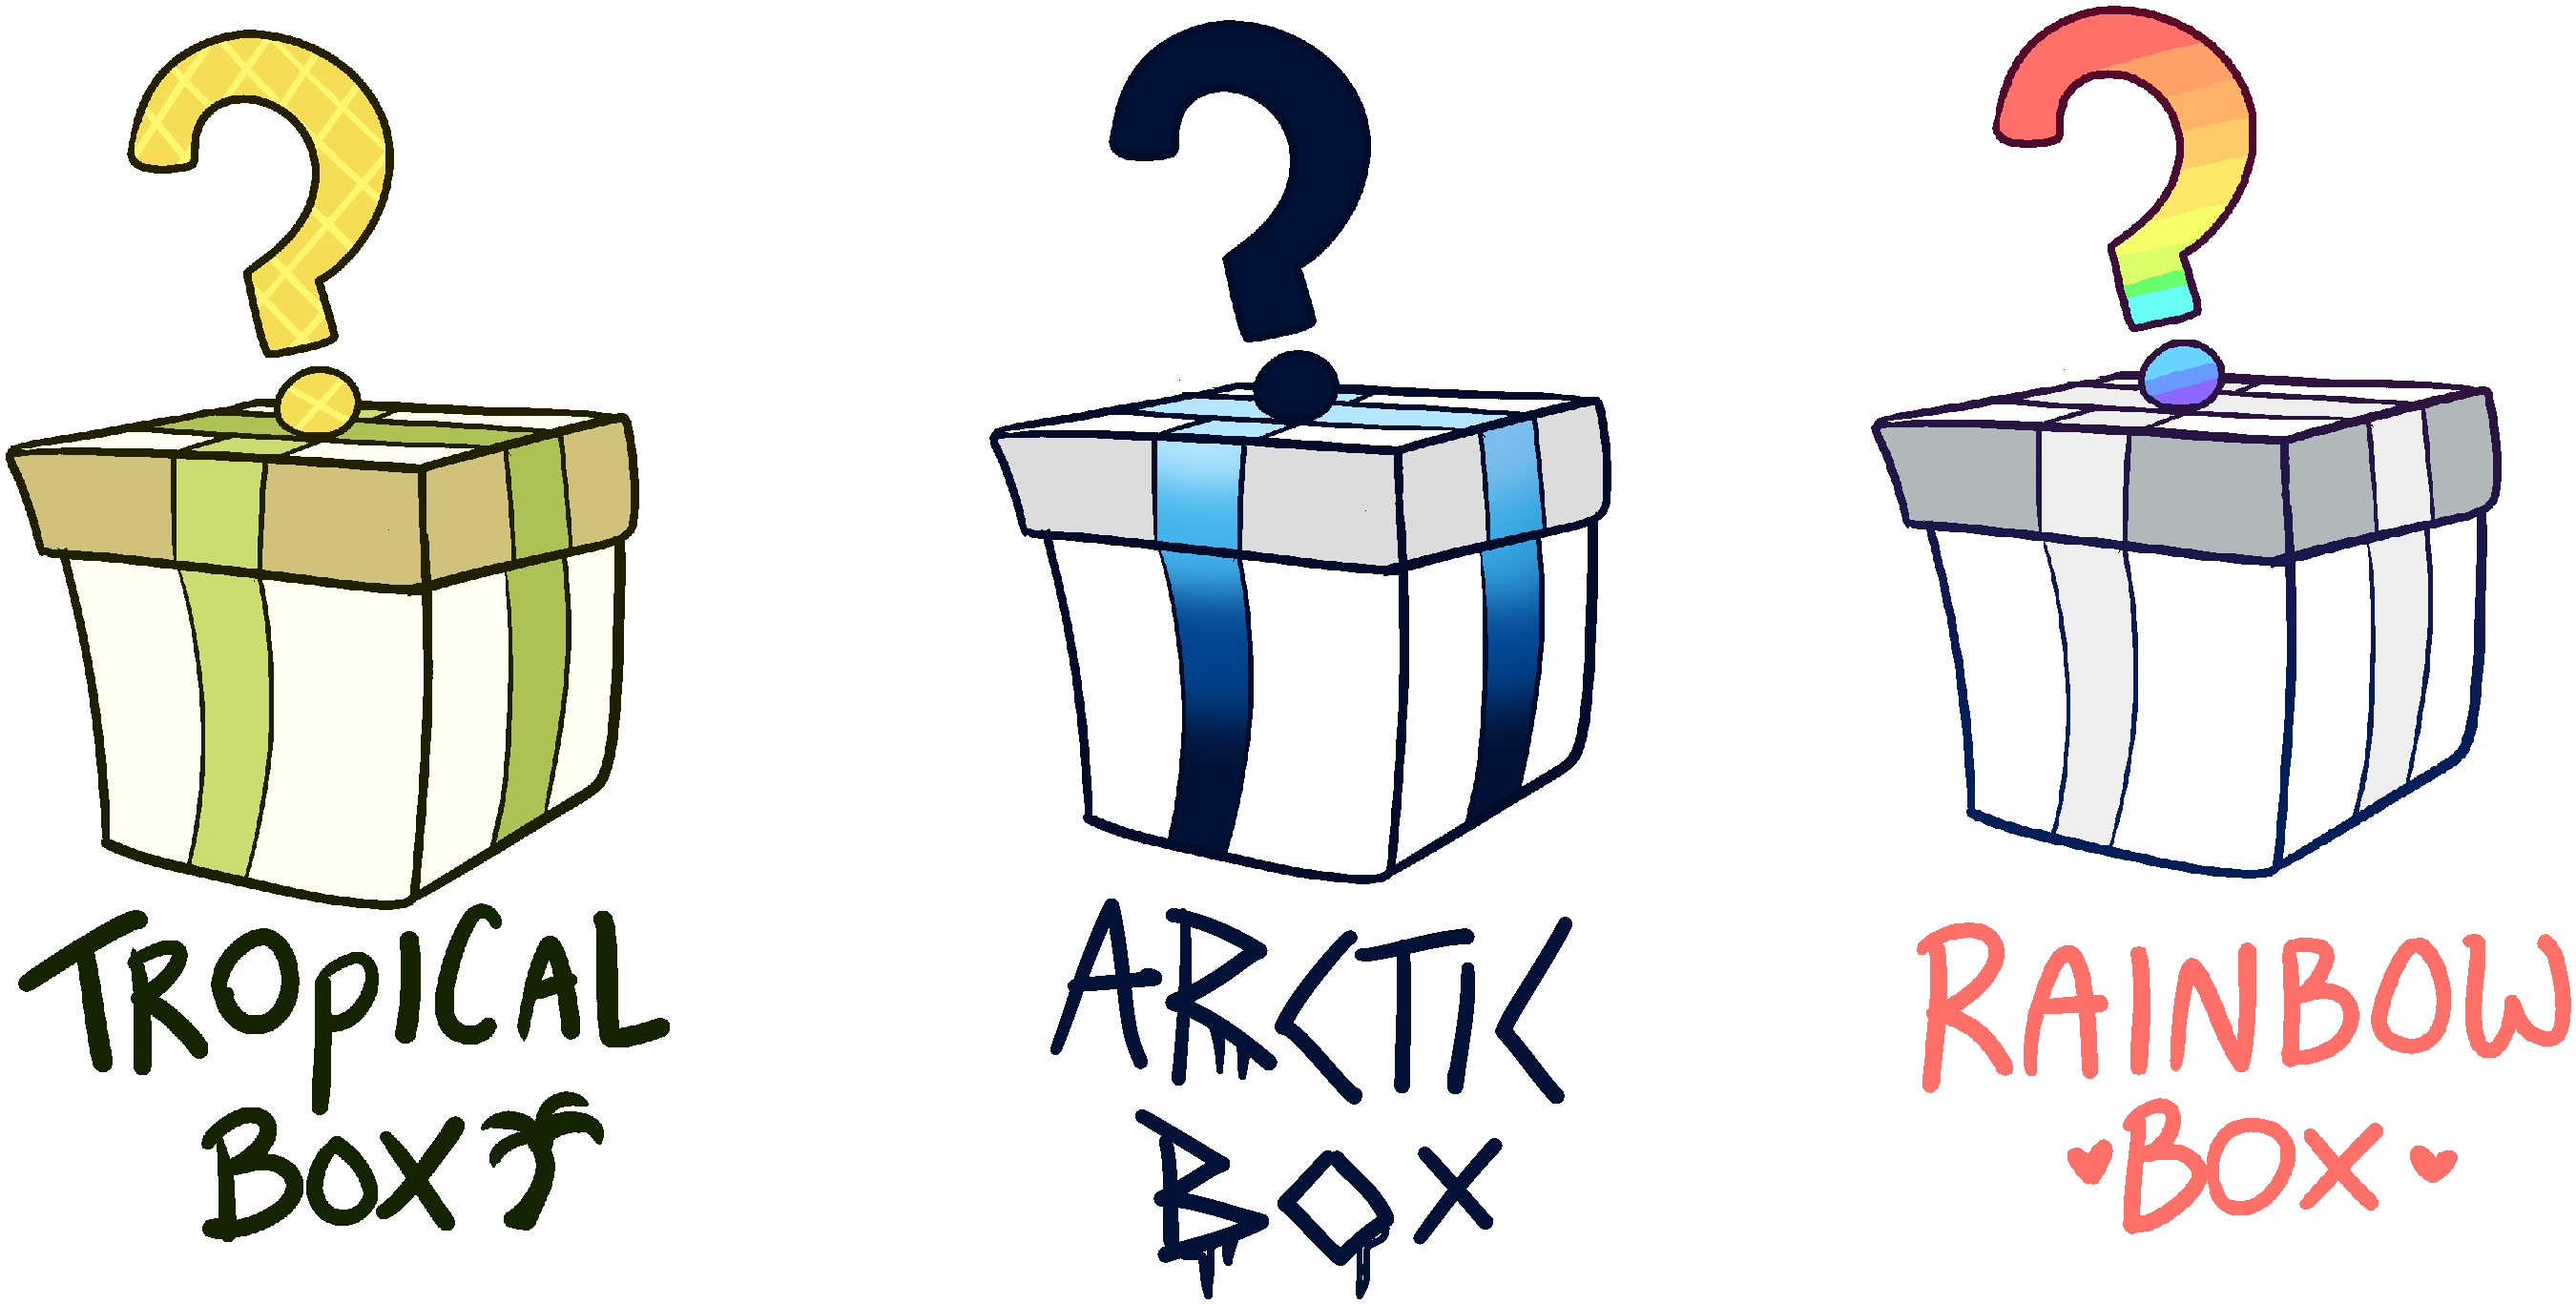 Mystery Box Adopts By Serene-monster - Mystery Box Adopts By Serene-monster (3000x1566)